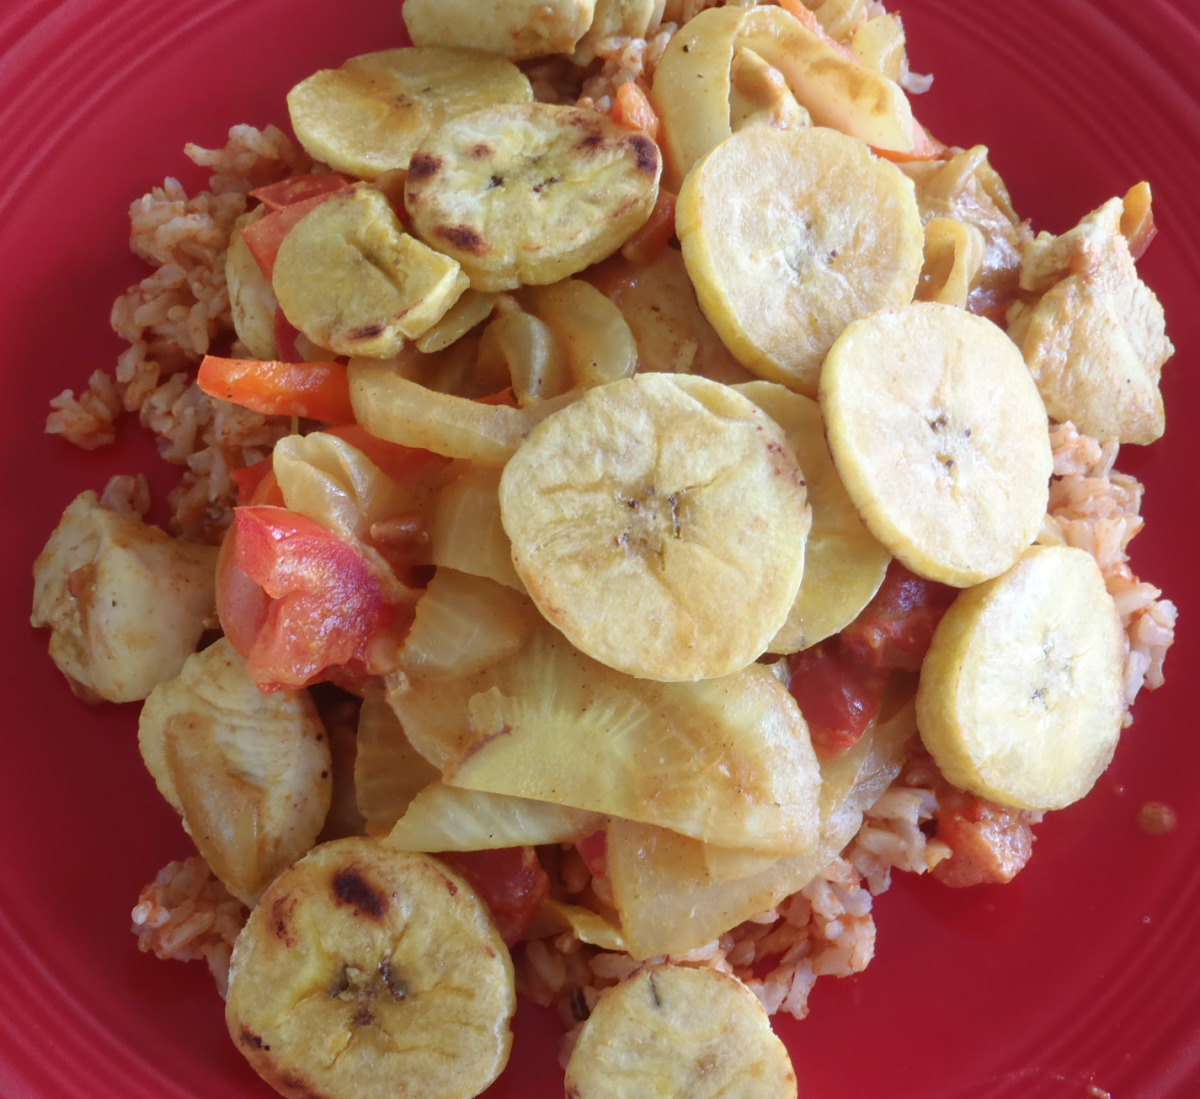 Brown Rice With Fried Bananas from Angola image